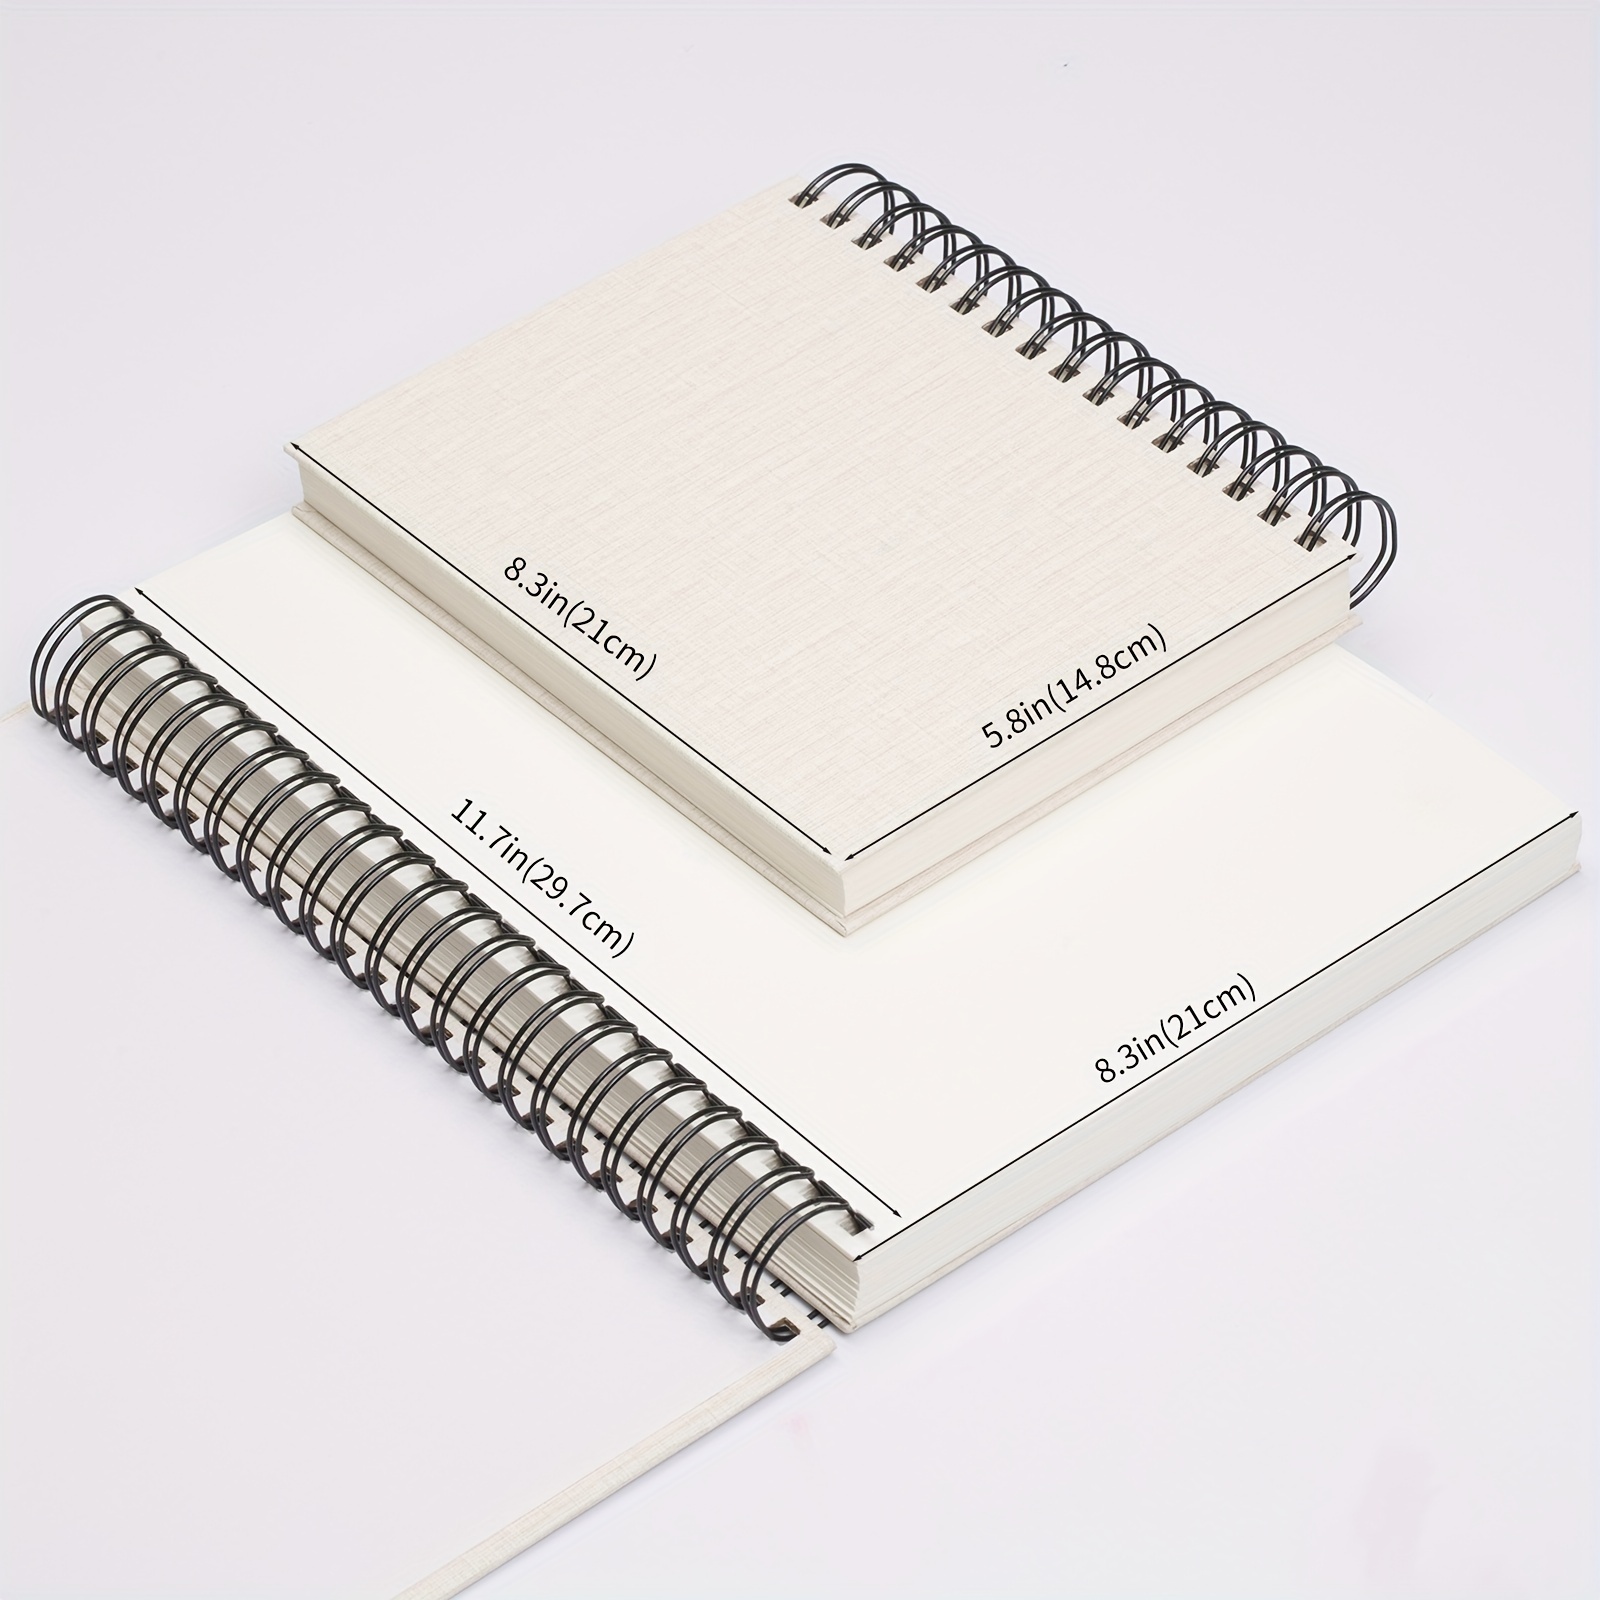 Giftexpress Pack of 12 Letter Size Sketch Book Bound Spiral Premium Sketch Pads Set, Pencil Sketch Book 30 Sheets Each, 8.5 inch x 11 inch Side Wire